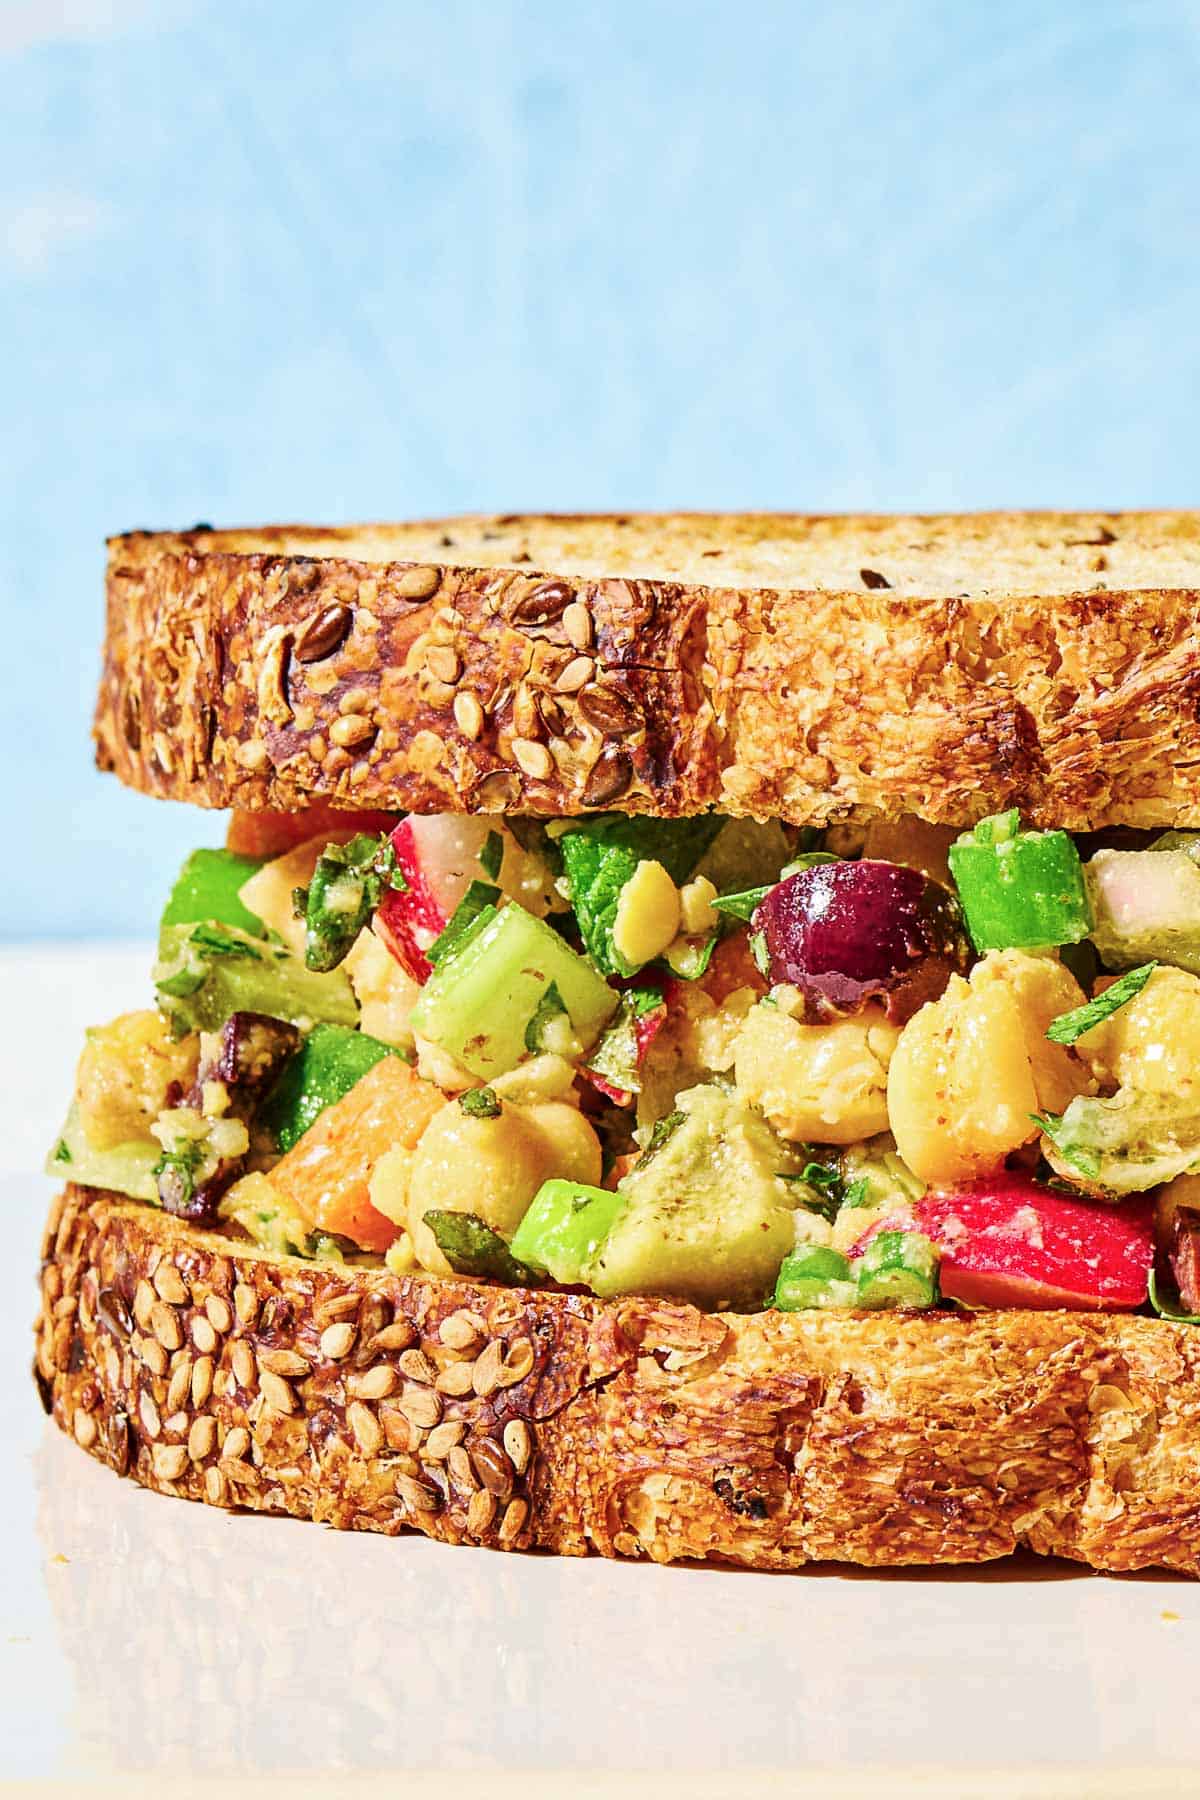 Close up of chickpea salad sandwich, showing the layers of fresh veggies, olives and more.